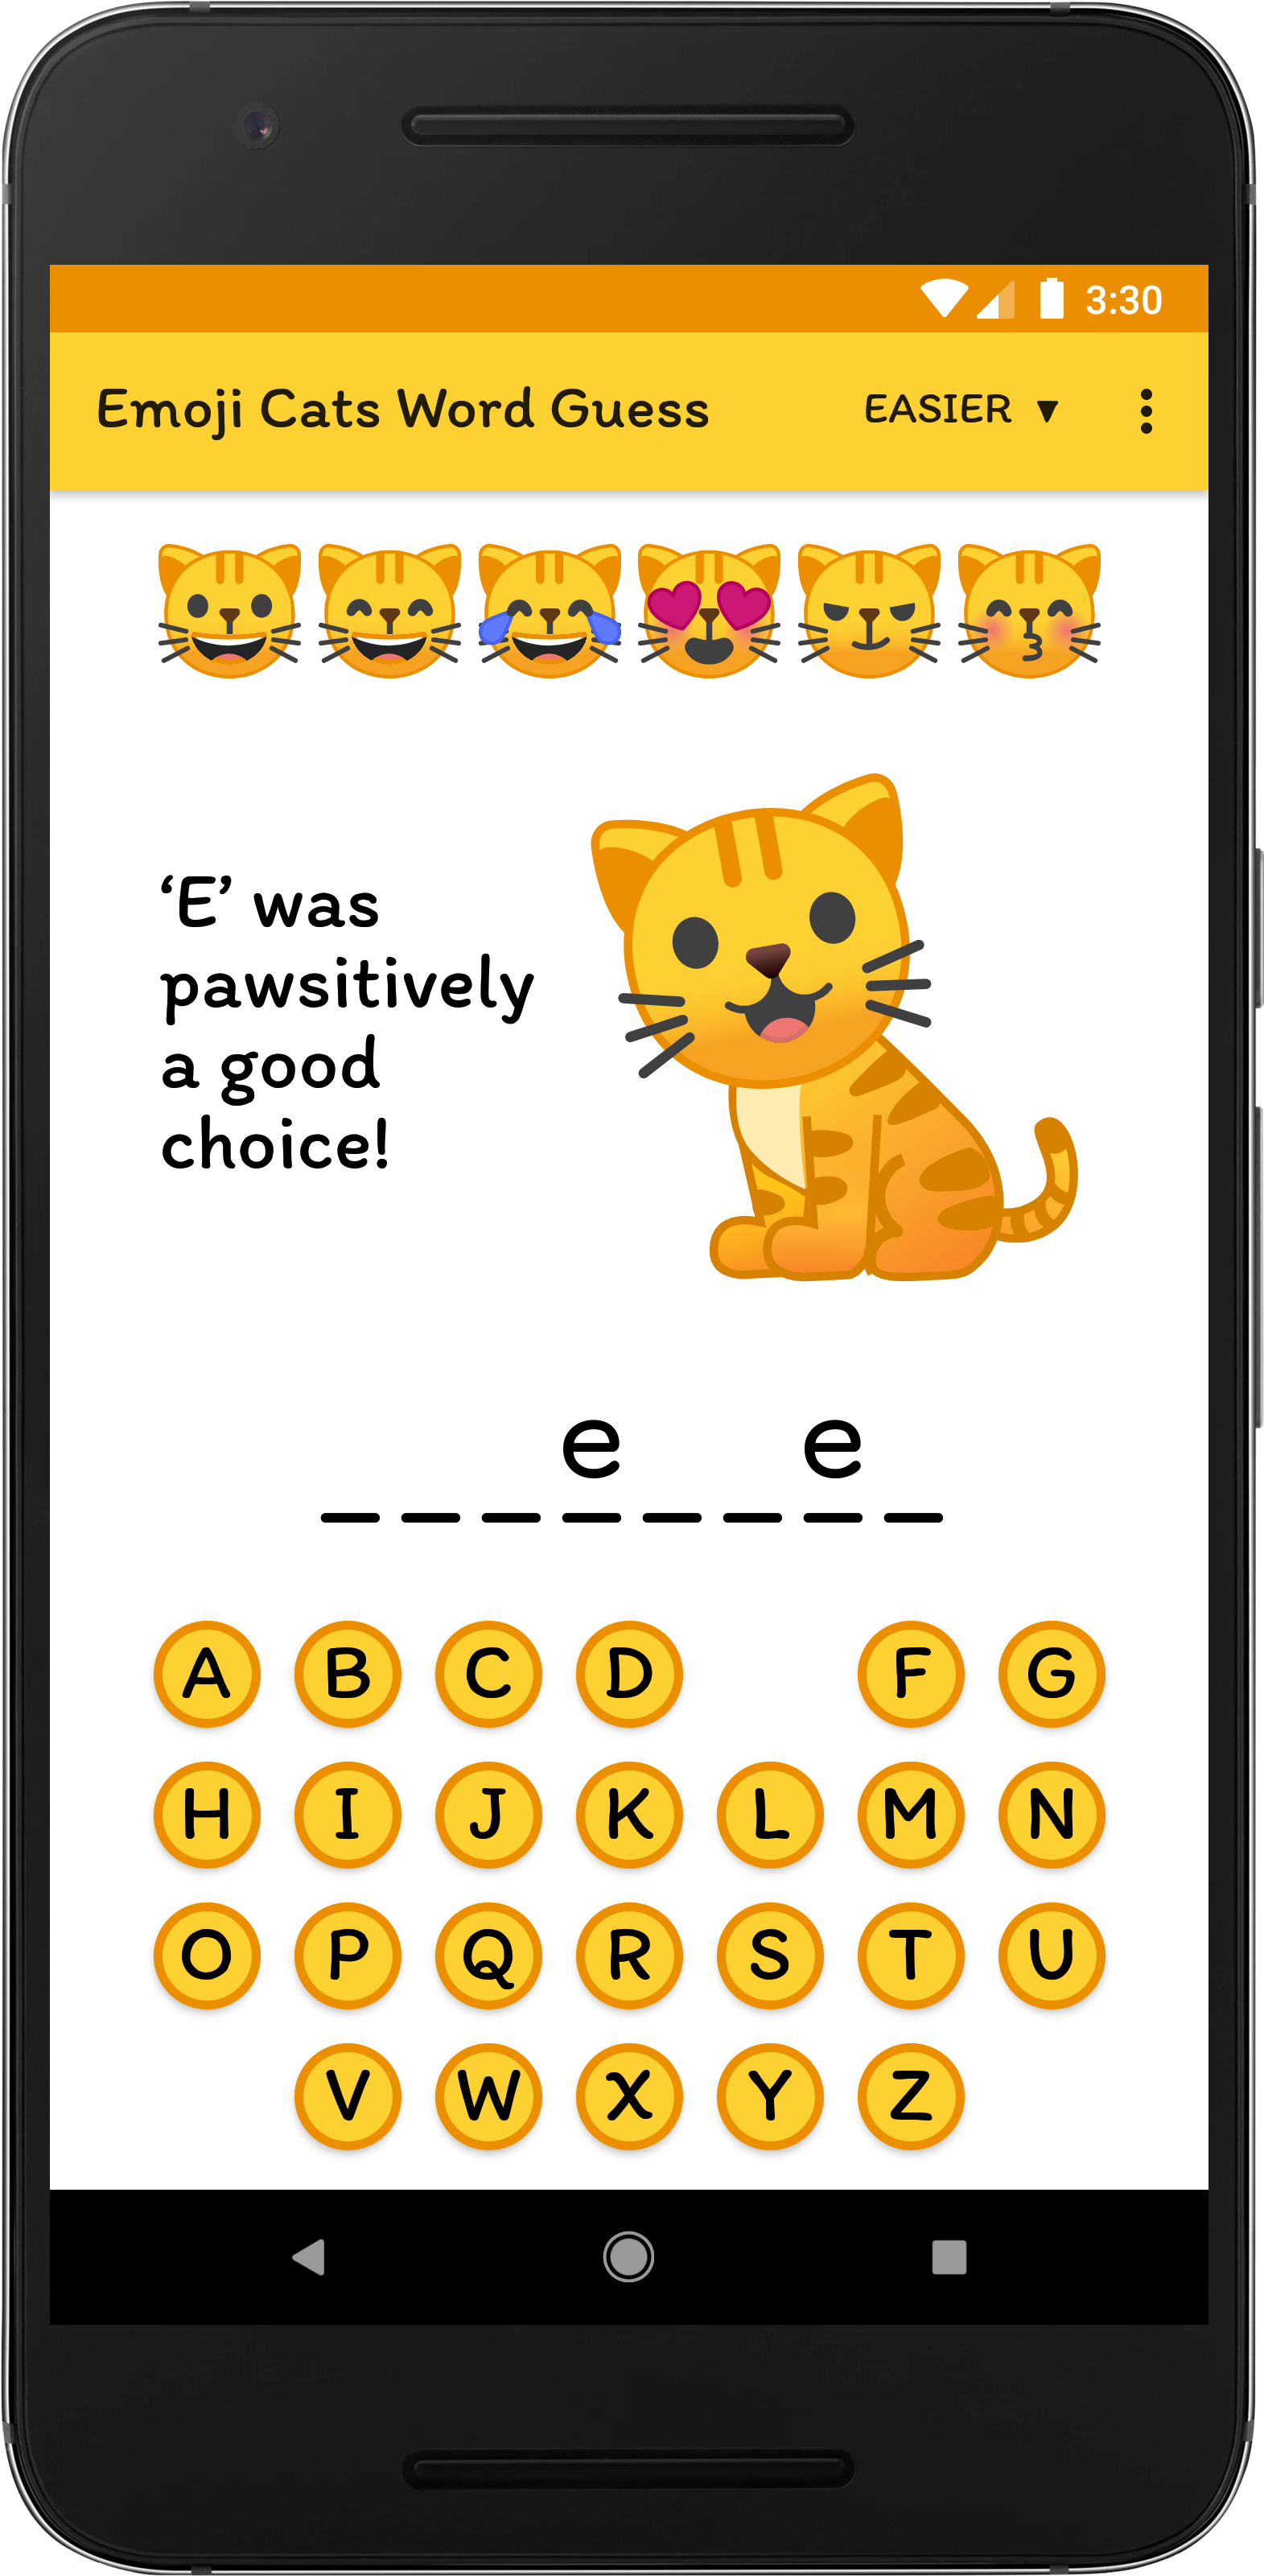 and Tricks for guessing letters – Emoji Cats Word Guess